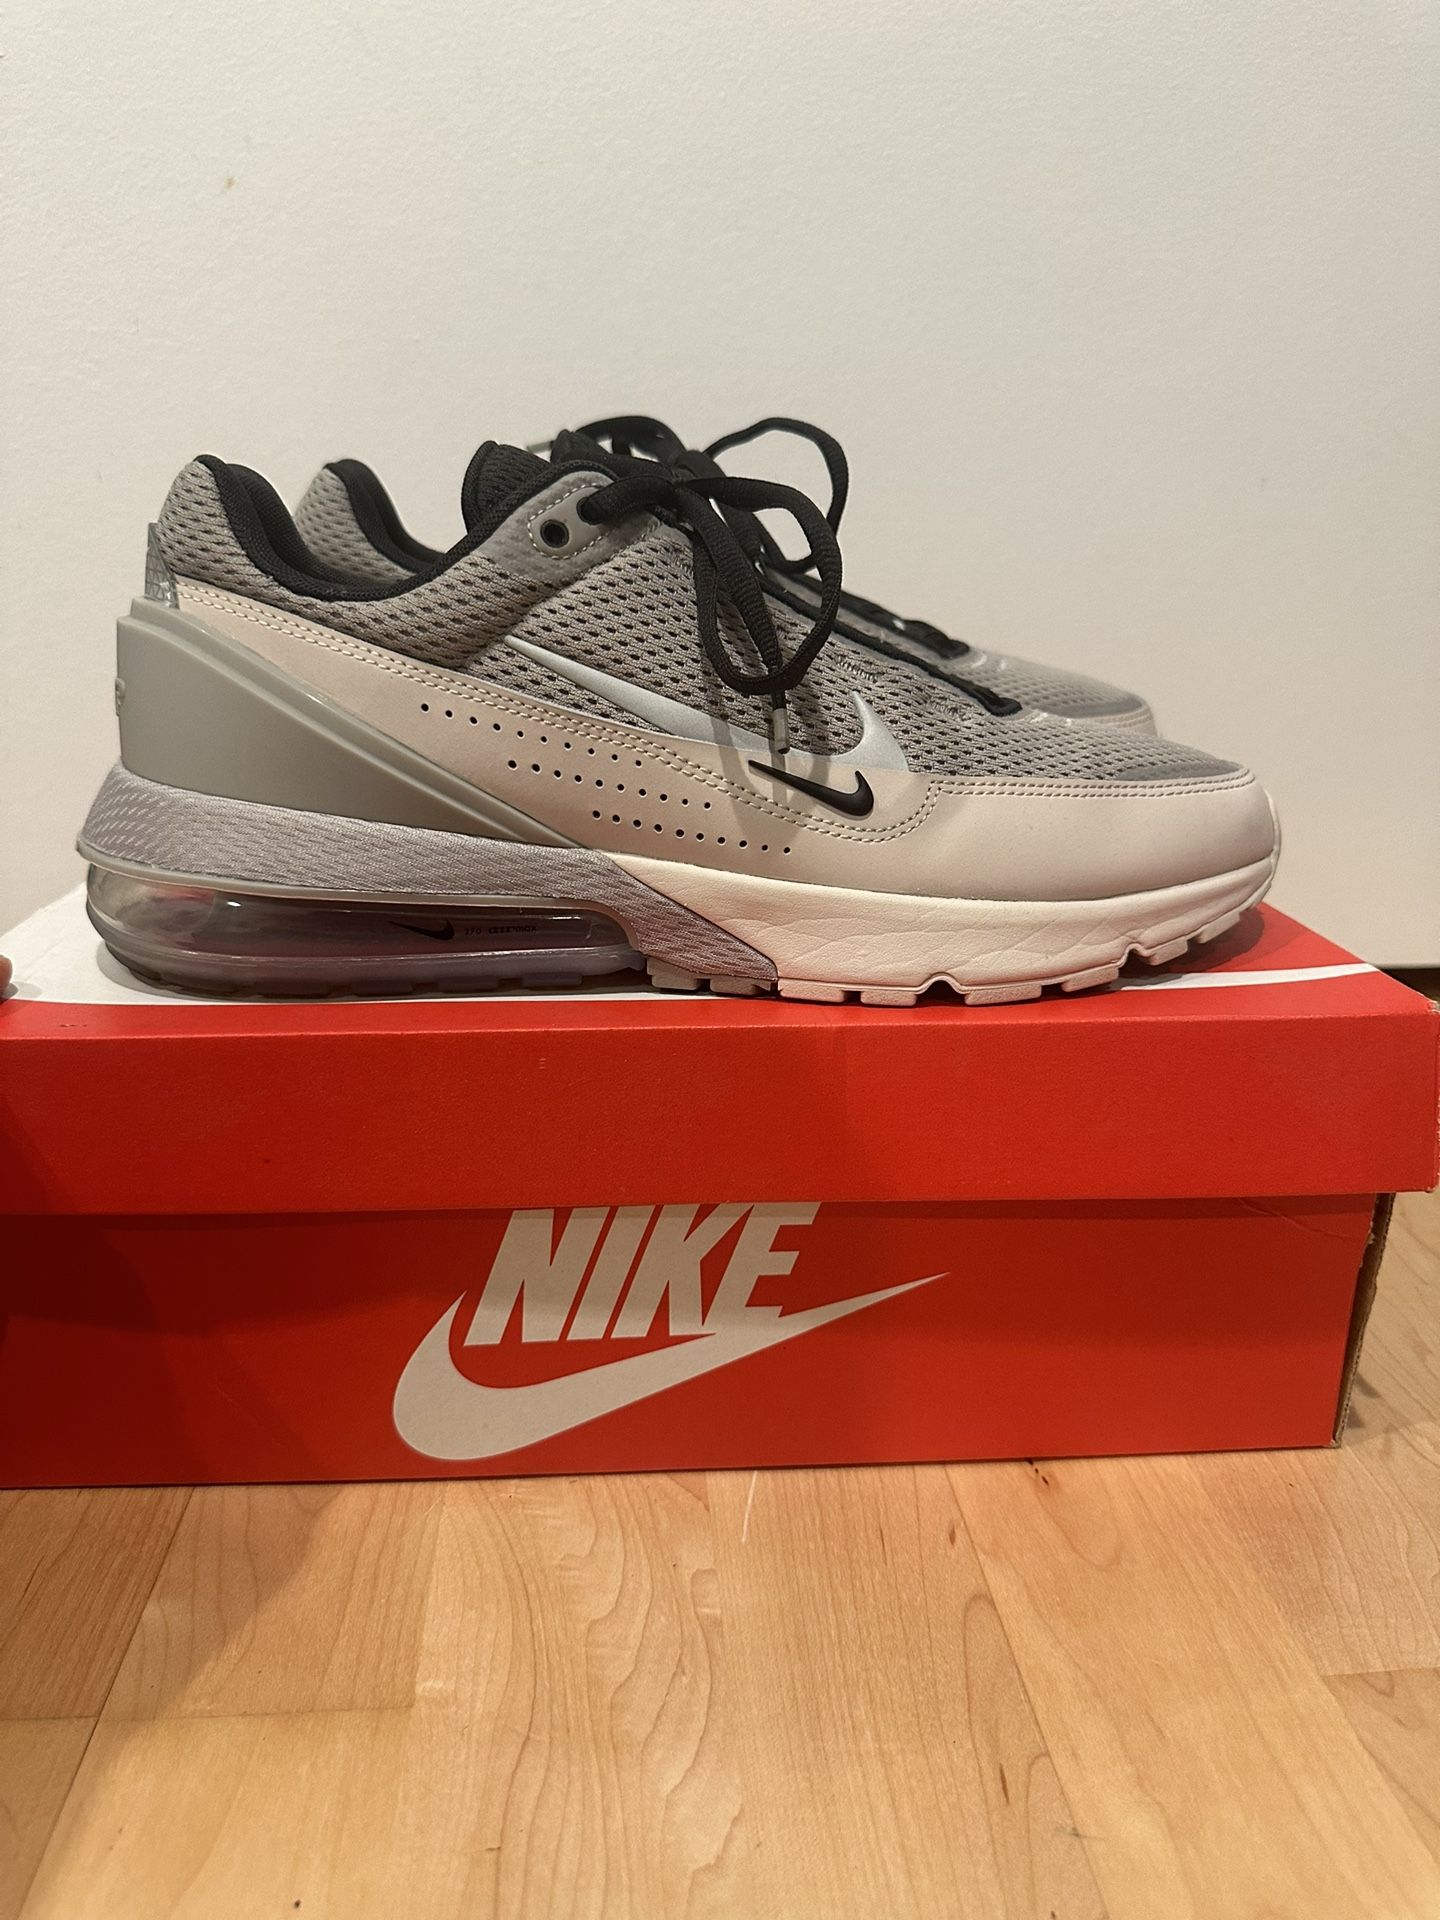 Nike Air Max Pulse - Size 11 - Worn once